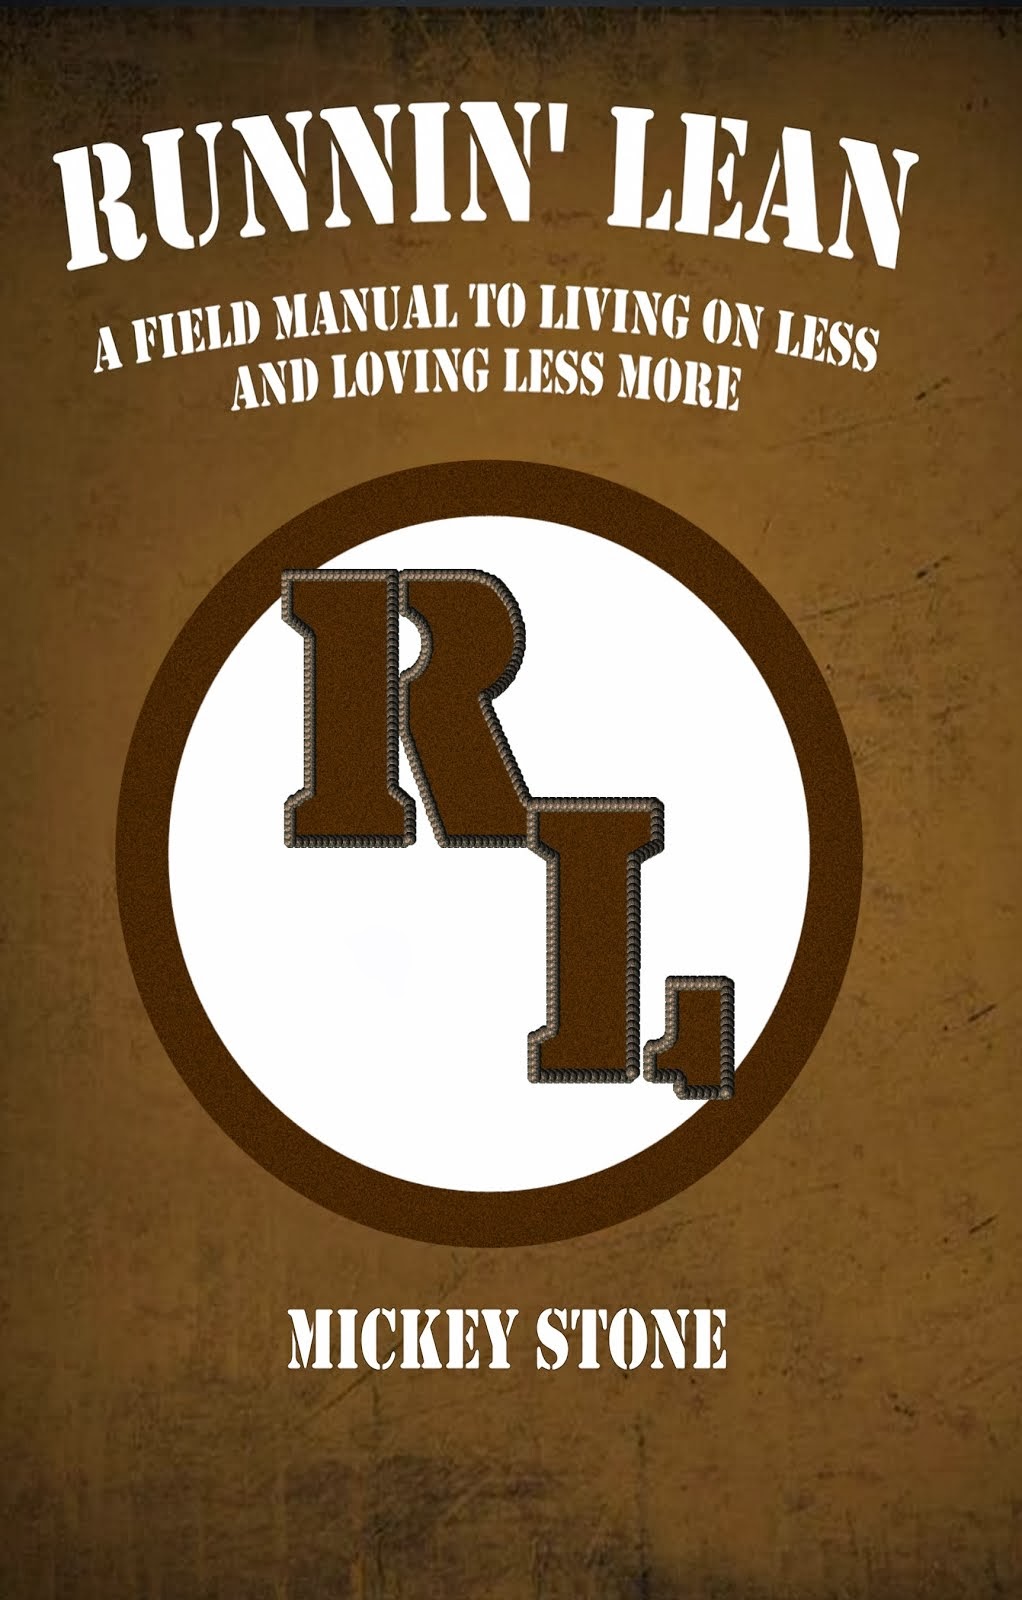 The Runnin' Lean Field Manual is now available on Amazon!